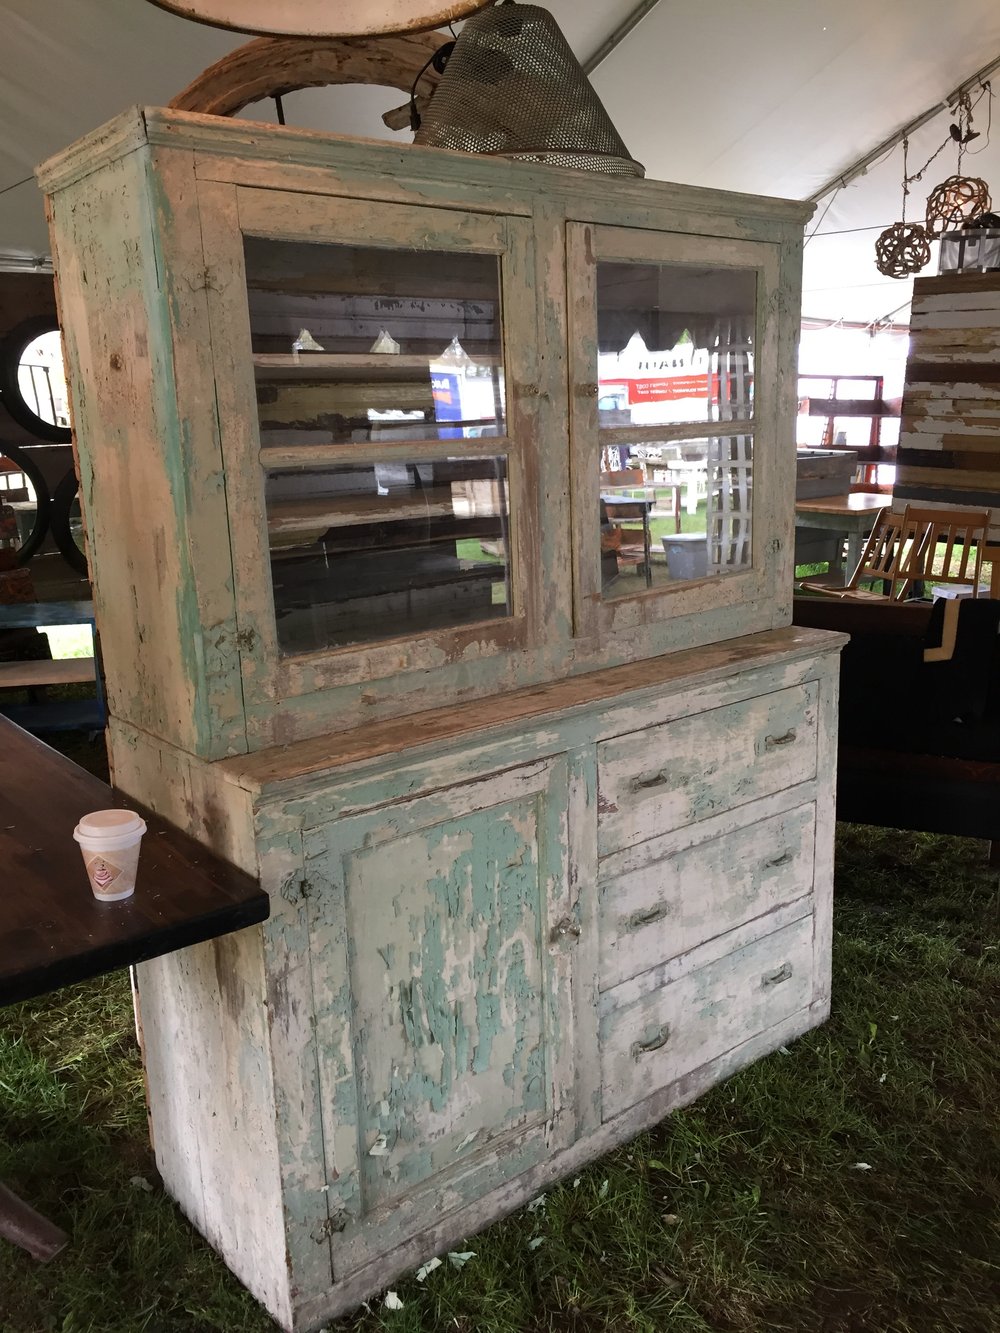  I was eyeing this old china cabinet for a client of mine, but the paint was really chipping and funky and I was worried about lead (she has two little kids)...so sadly this stayed behind. 